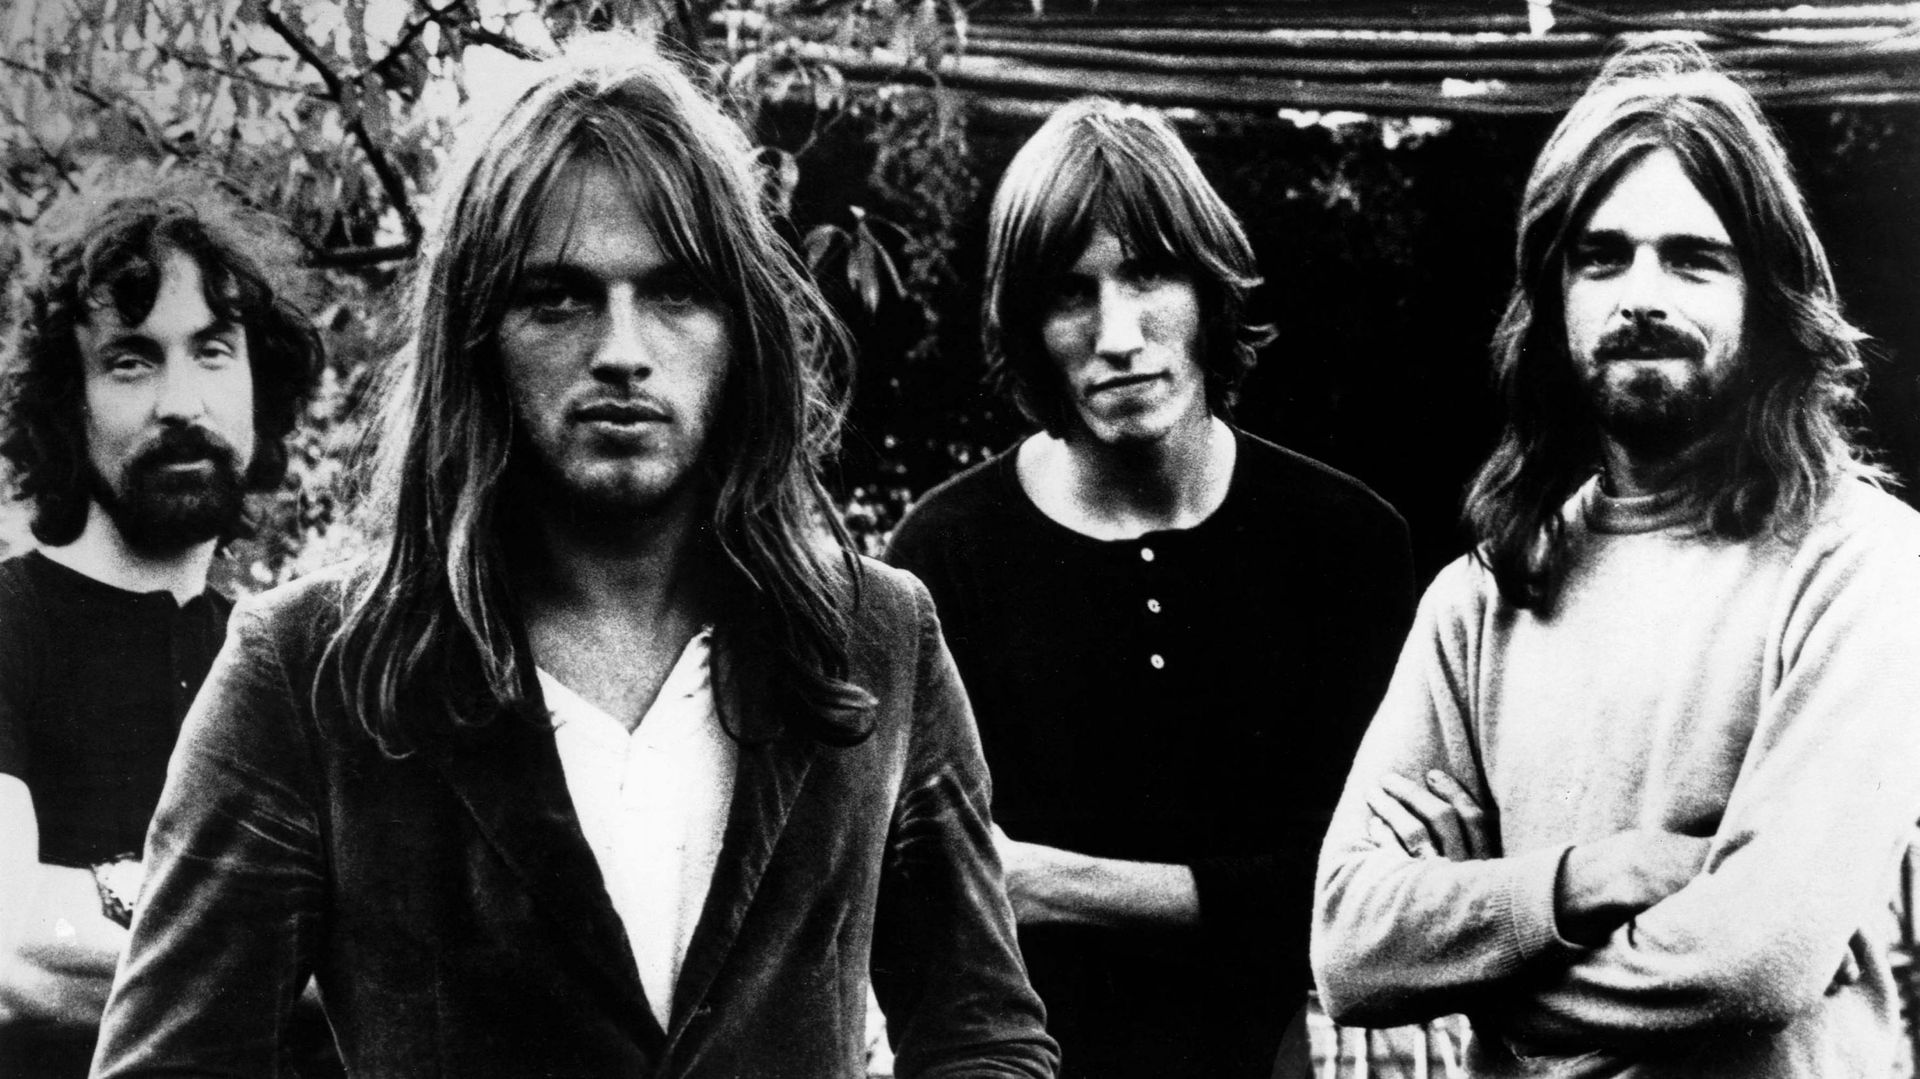 Photo of Roger WATERS and Rick WRIGHT and PINK FLOYD and Nick MASON and David GILMOUR